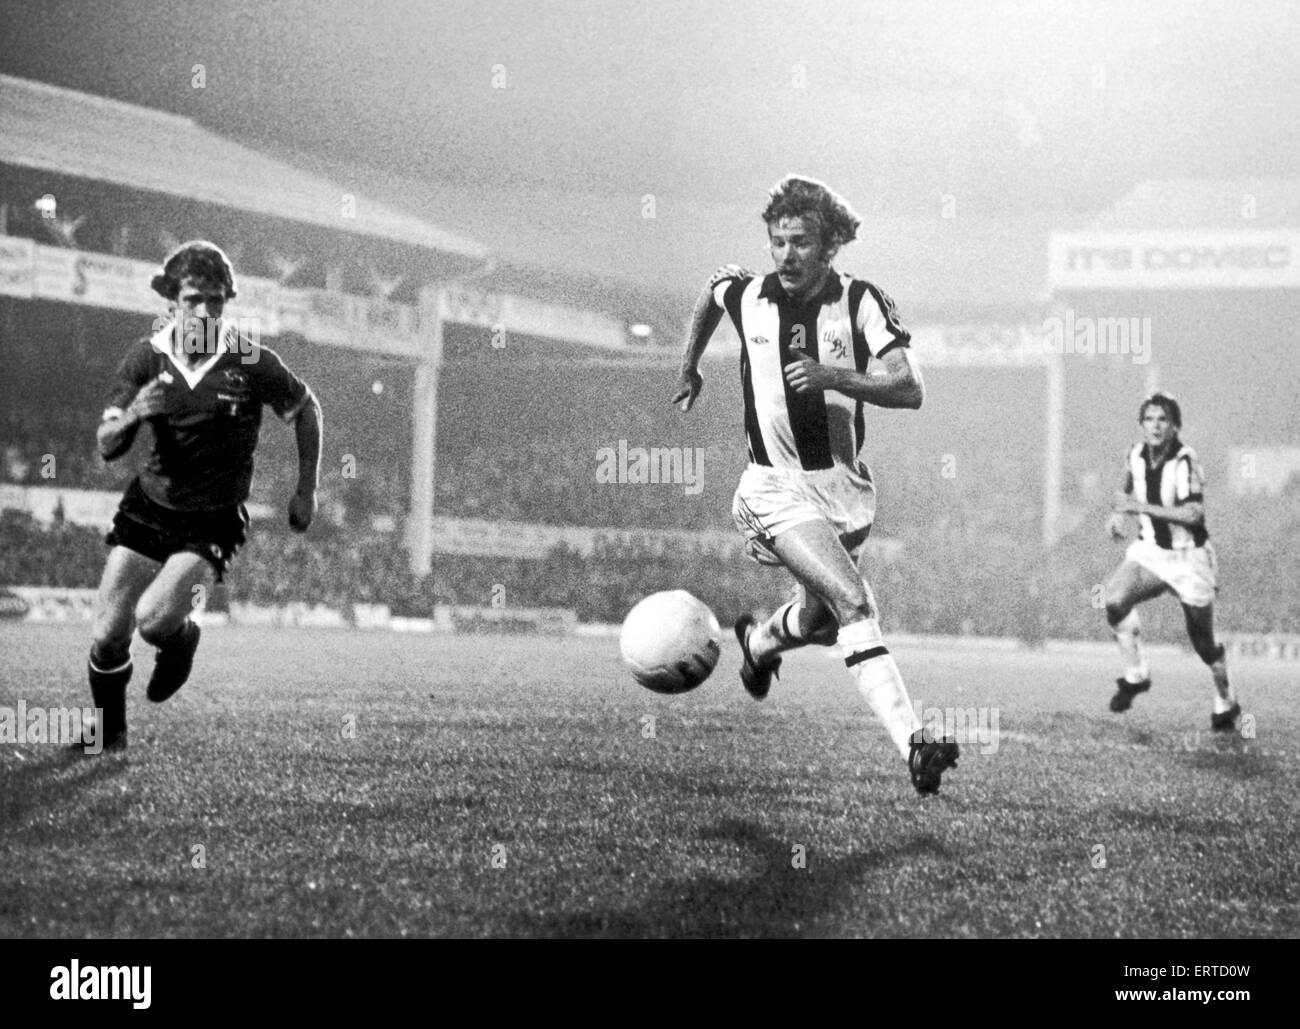 David Mills attacking the Manchester United goal area with Jimmy Nicholls in pursuit. West Bromwich Albion V Manchester United, score 2-0 to West Bromwich Albion, League Division One, venue The Hawthorns. 10th October 1979. Stock Photo